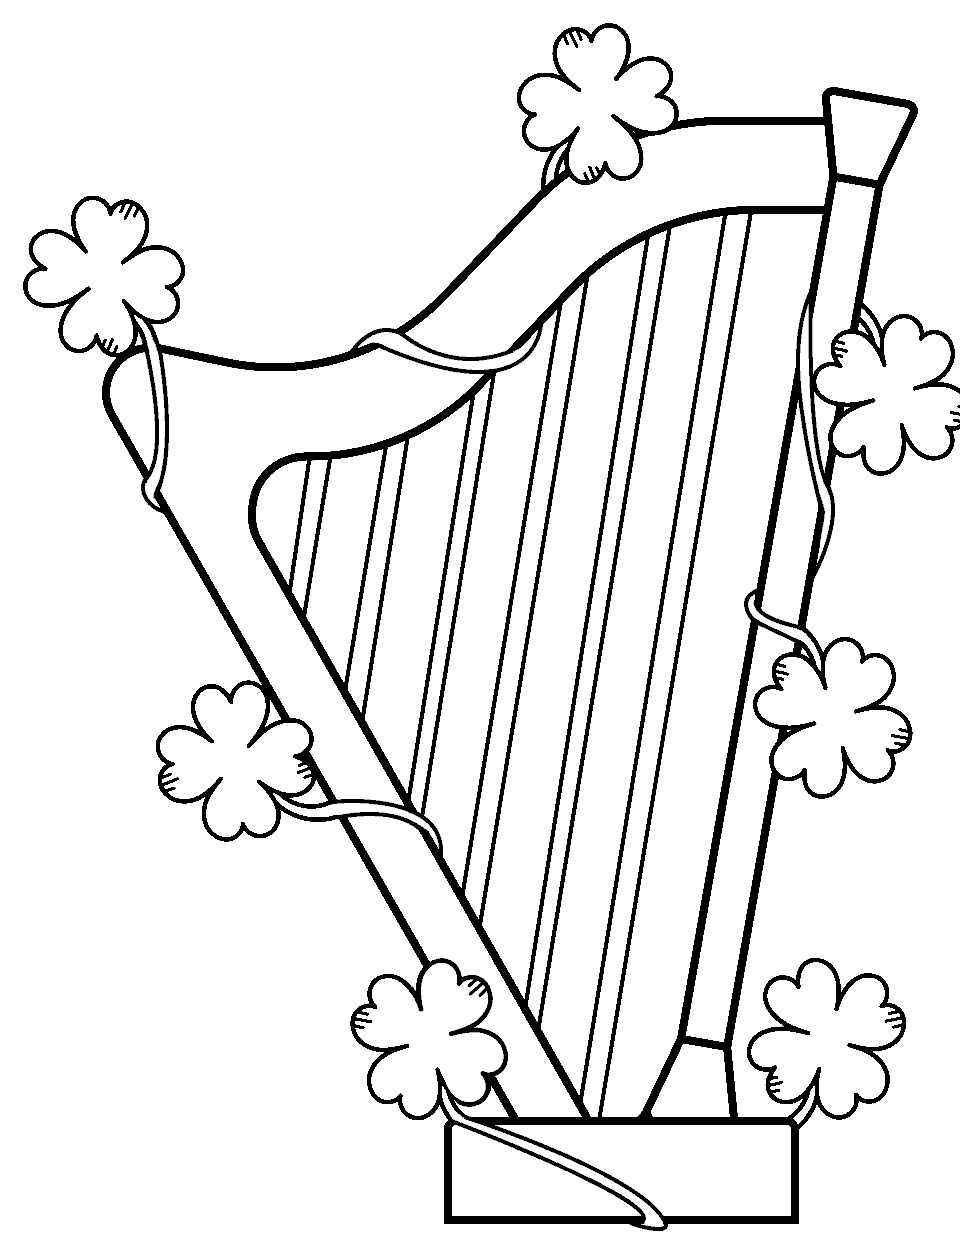 Golden Harp with Shamrock Motif Coloring Page - A golden harp intricately designed with shamrock motifs.